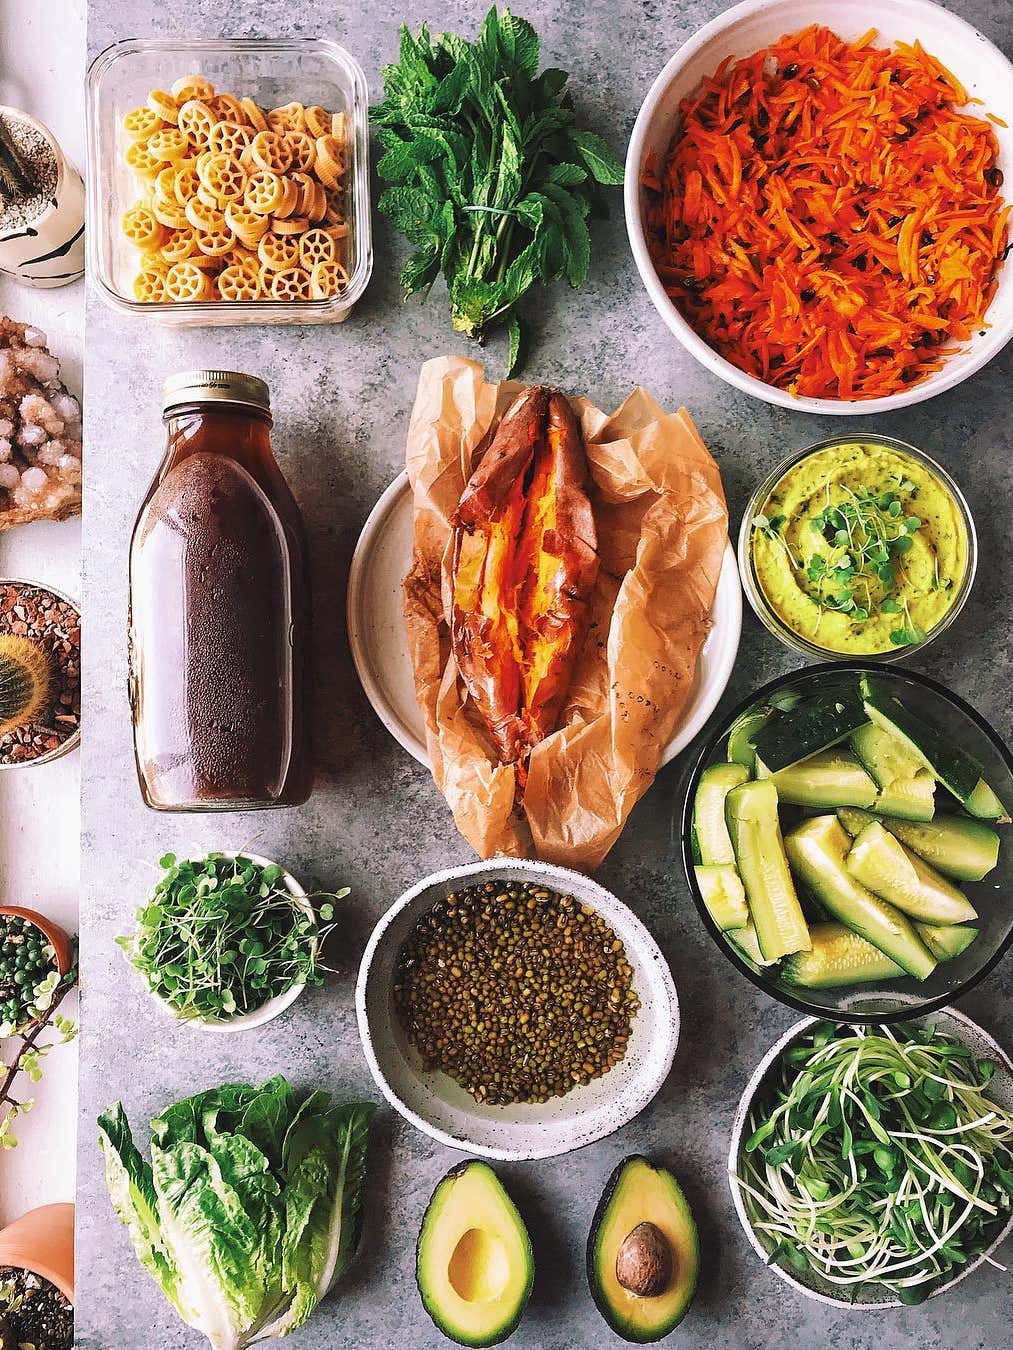 Yes, There Is a Right Way to Meal Prep—One Pro Shows Us How